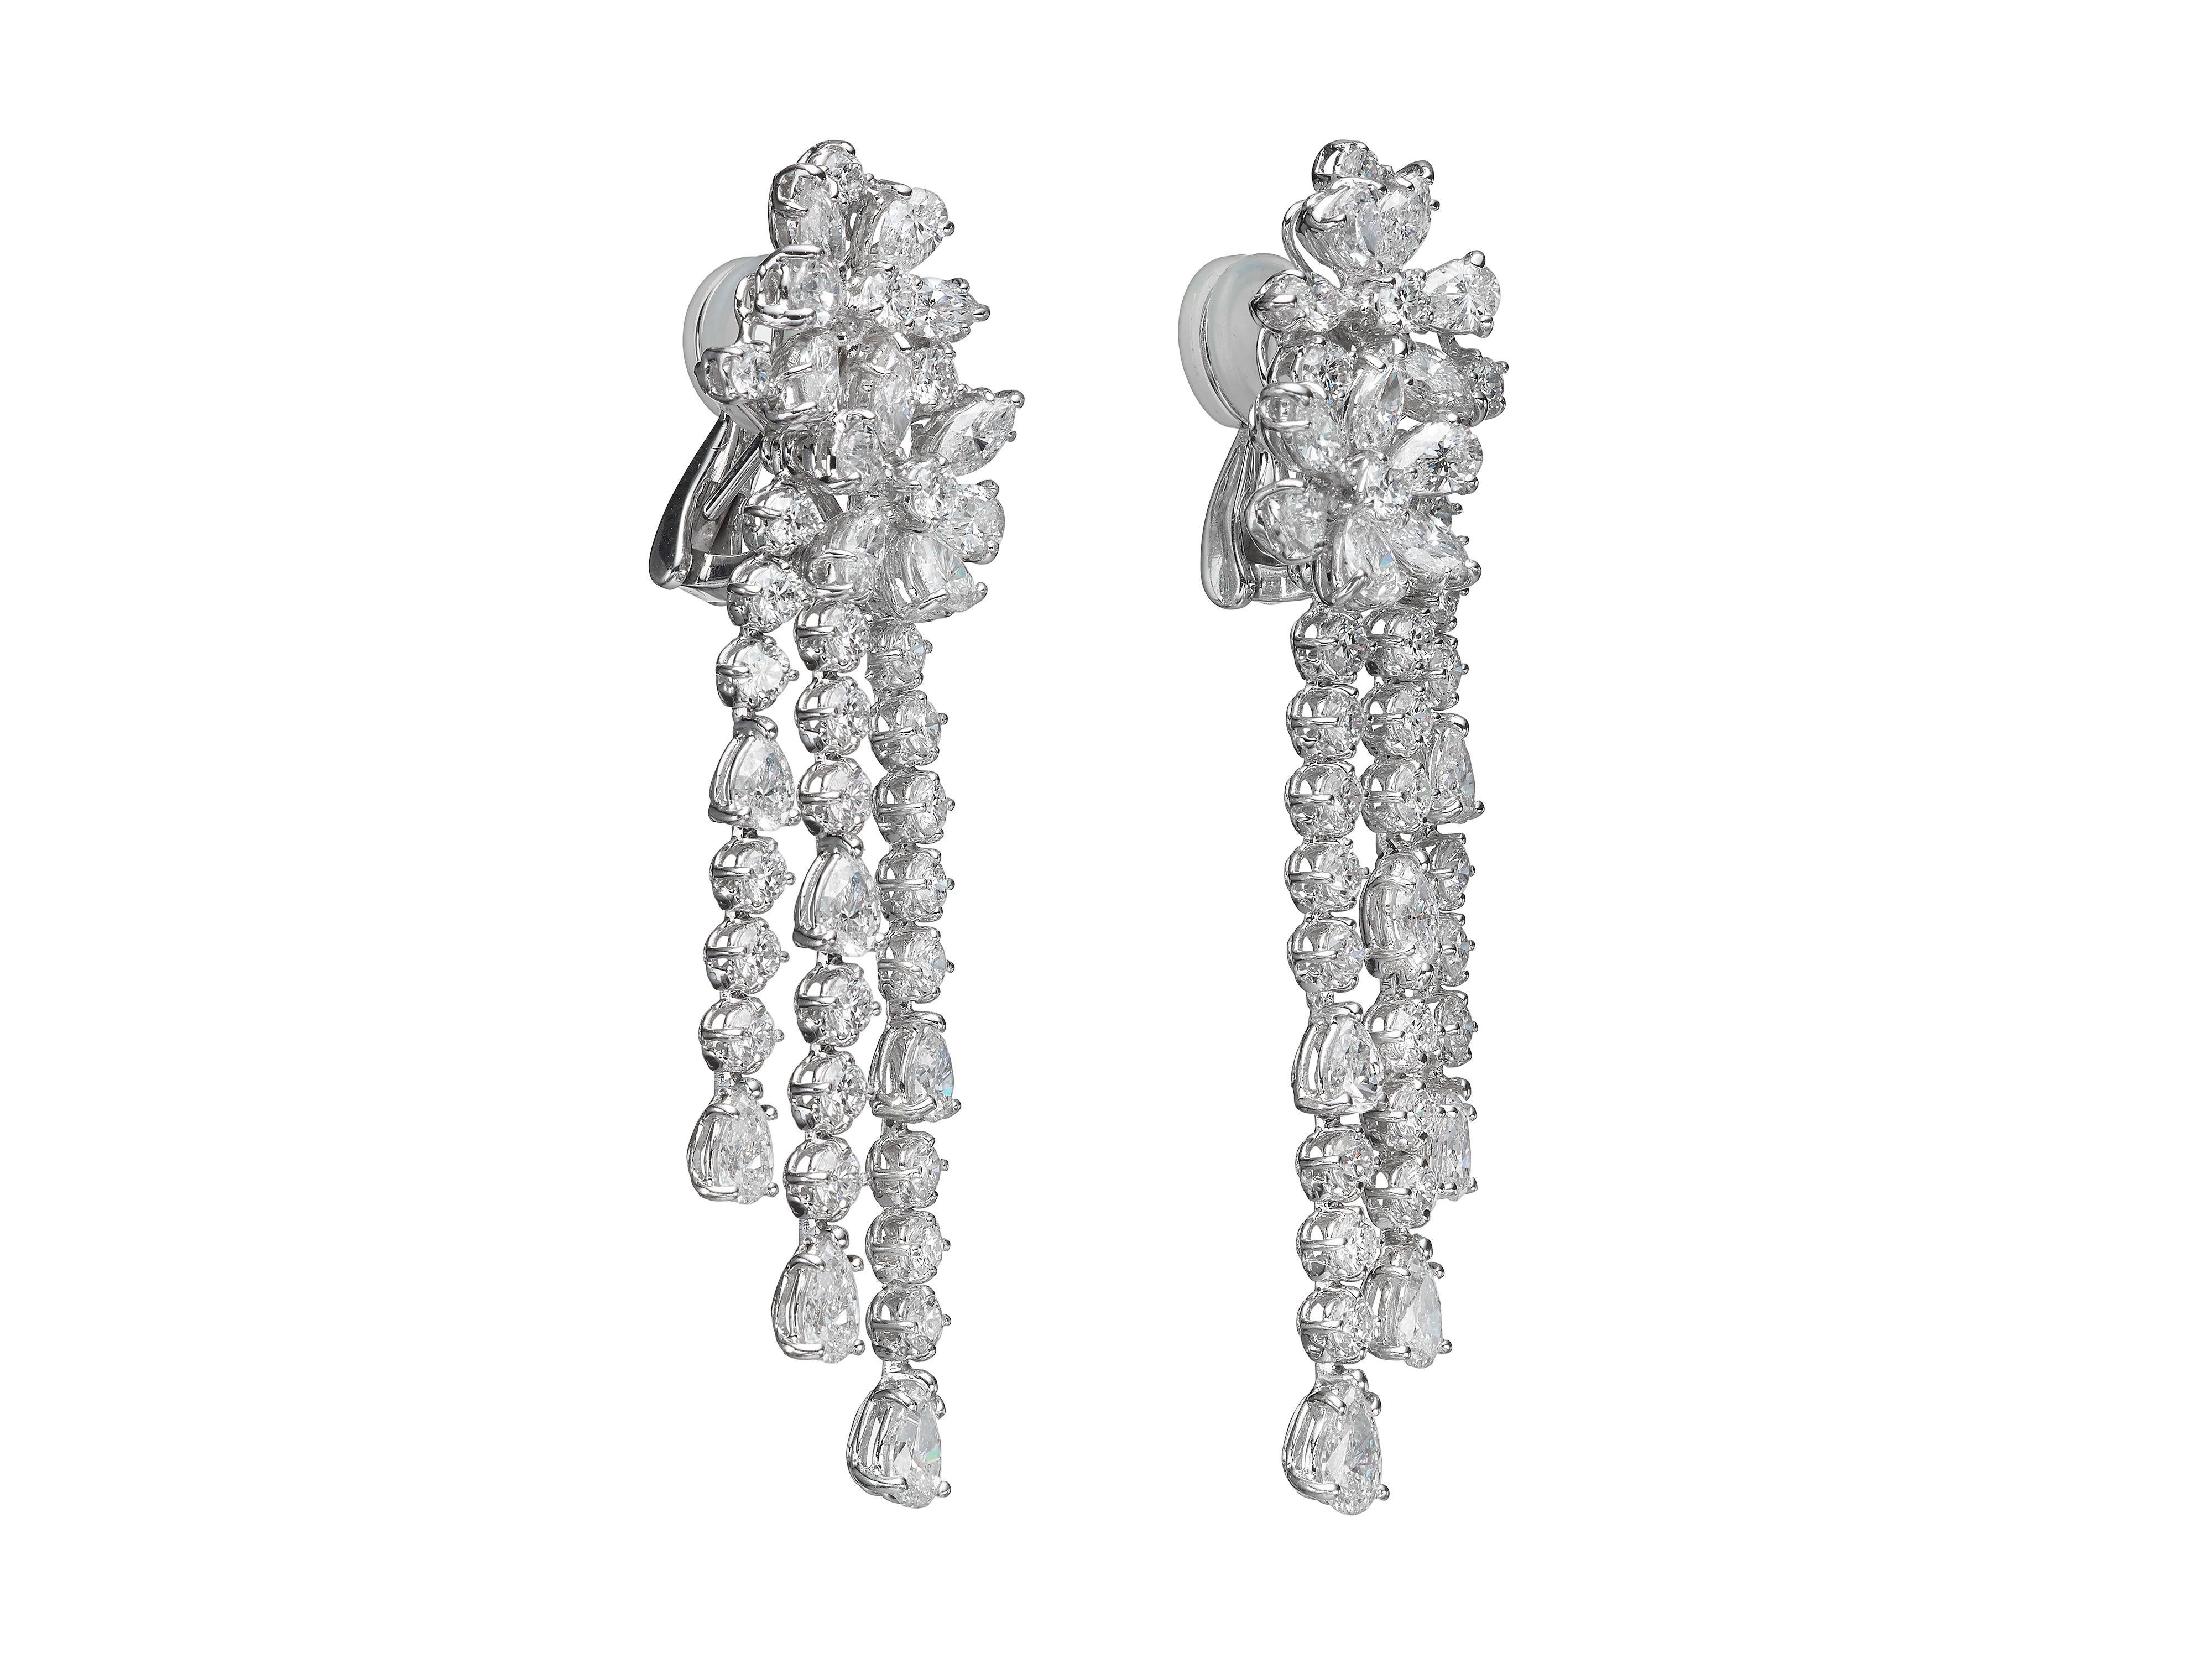 Butani's diamond chandelier earrings feature blooming floral-shaped diamond posts and a cascading silhouette of marquise-cut, brilliant-cut and pear-cut diamonds that are suspended below.  Total diamond weight is 9.98 carats.  Set in 18K white